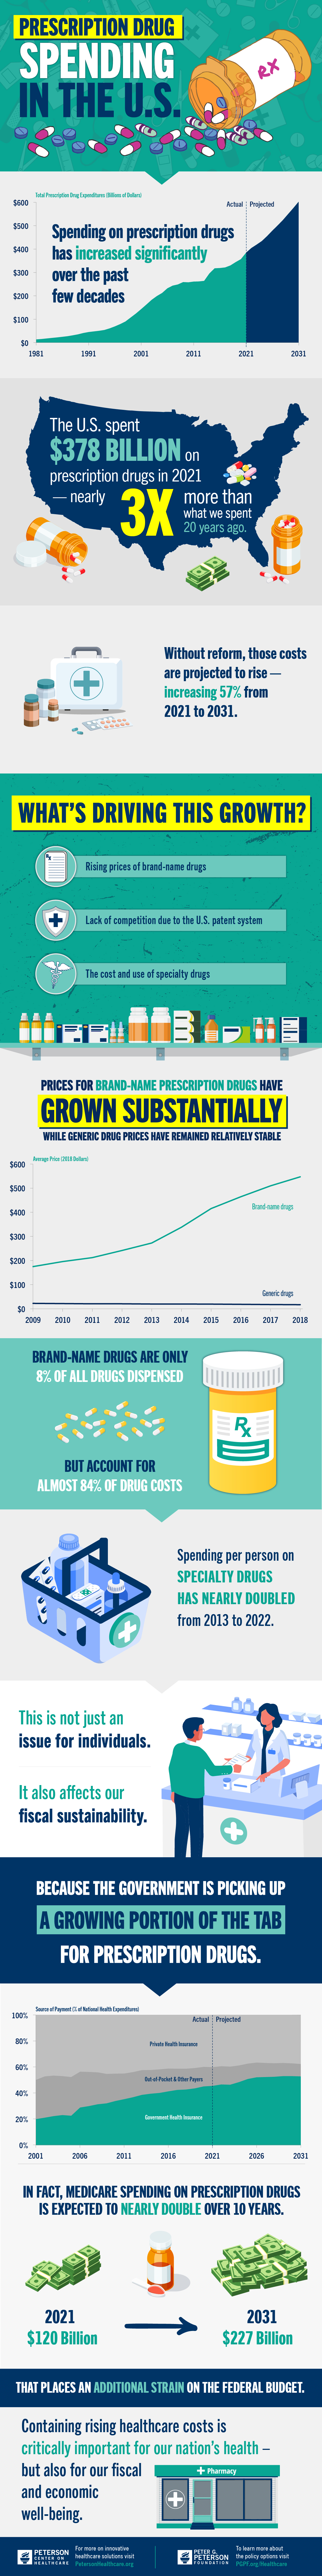 Spending on Prescription Drugs Has Been Growing Exponentially over the Past Few Decades